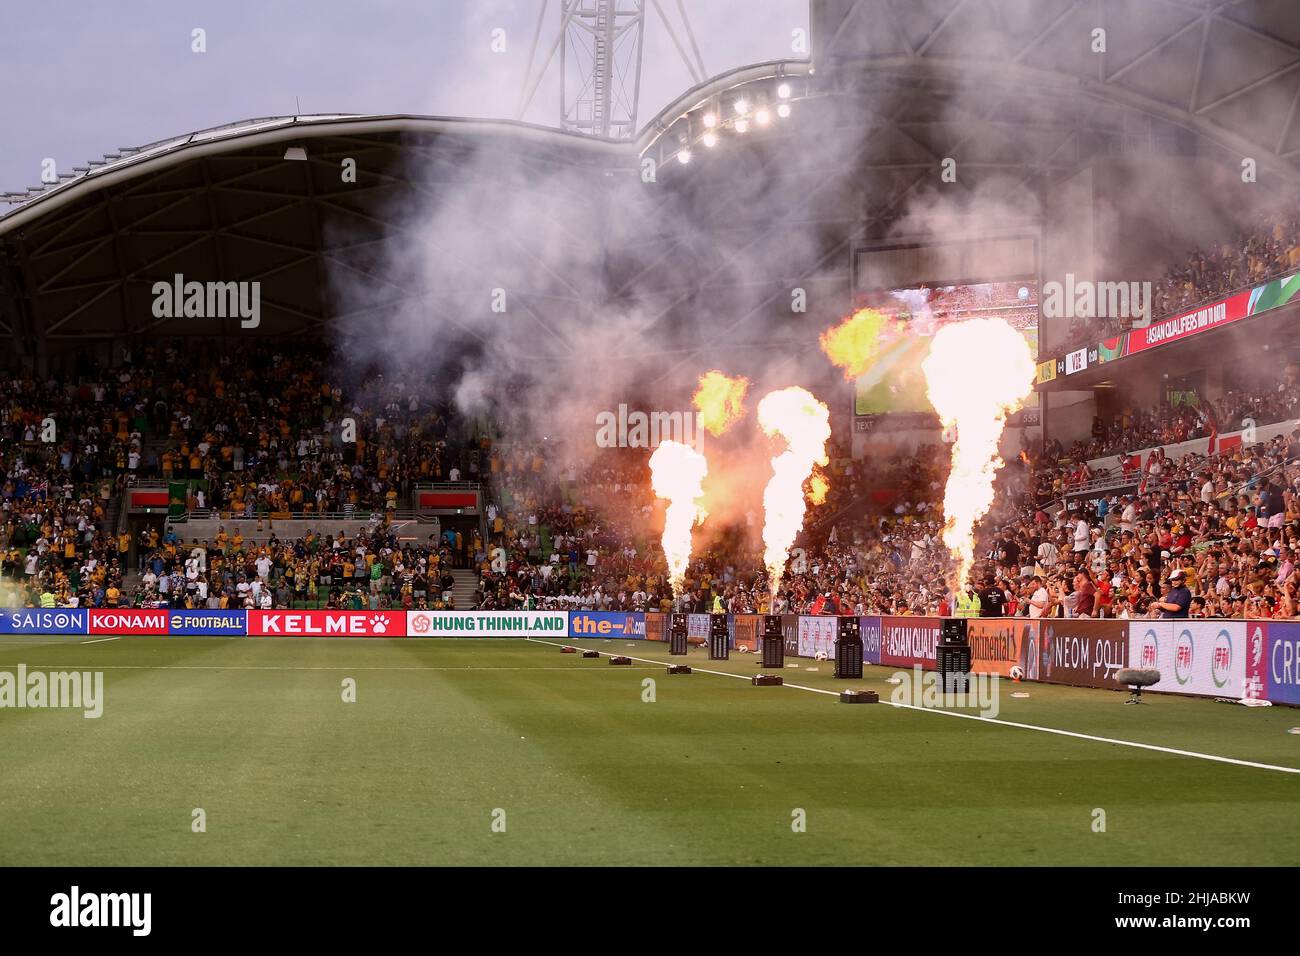 Melbourne, Australia, 27 January, 2022. Fireworks are set off as the players walk onto the field during the World Cup Qualifier football match between Australia Socceroos and Vietnam on January 27, 2022 at AAMI Park in Melbourne, Australia. Credit: Dave Hewison/Speed Media/Alamy Live News Stock Photo